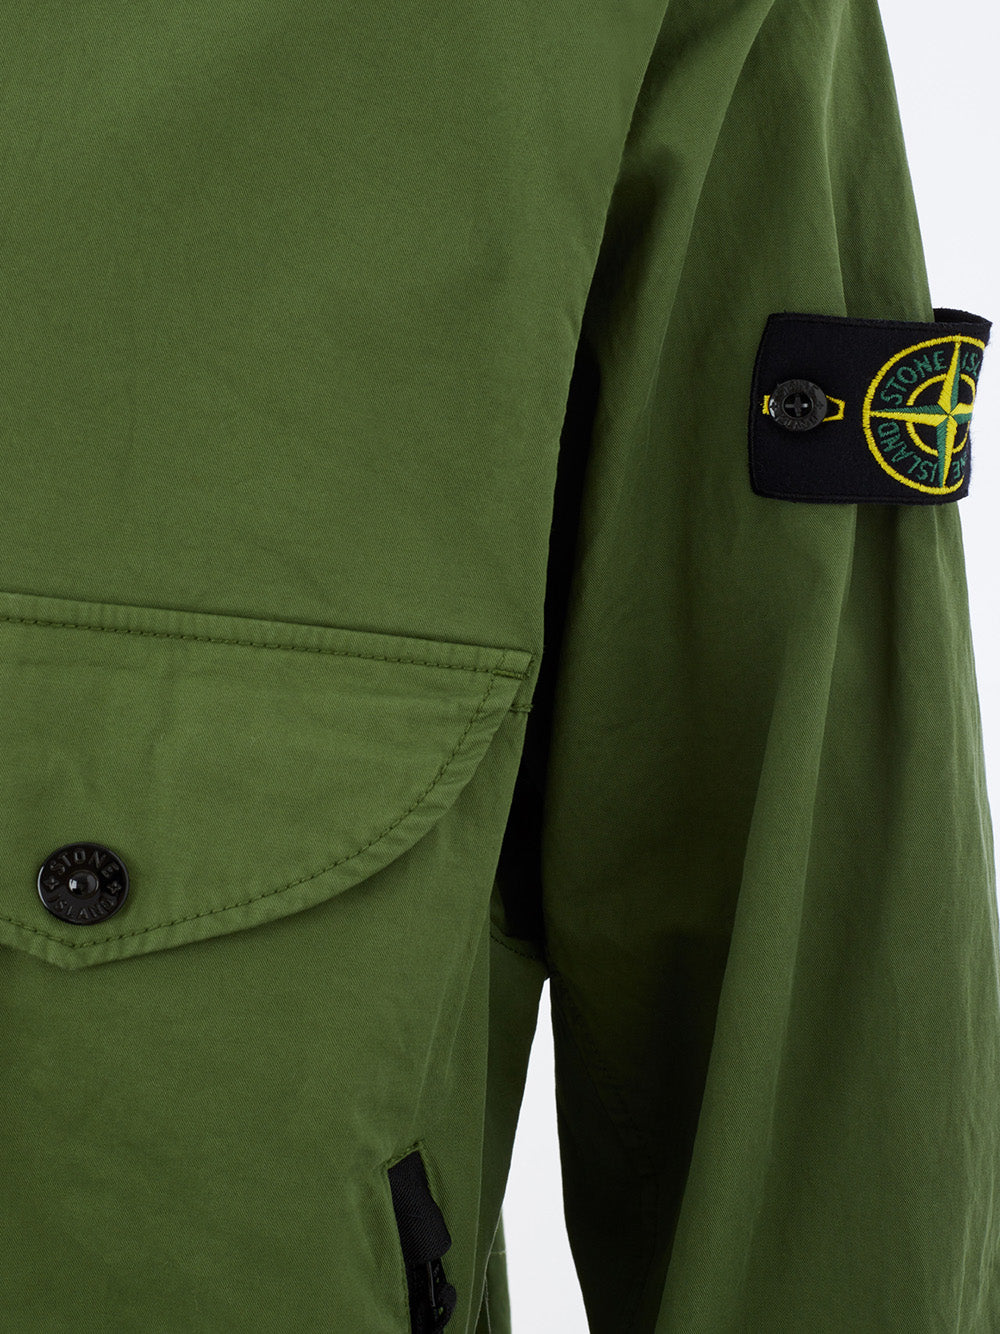 Stone Island Over shirt Hooded Green Cotton Jacket